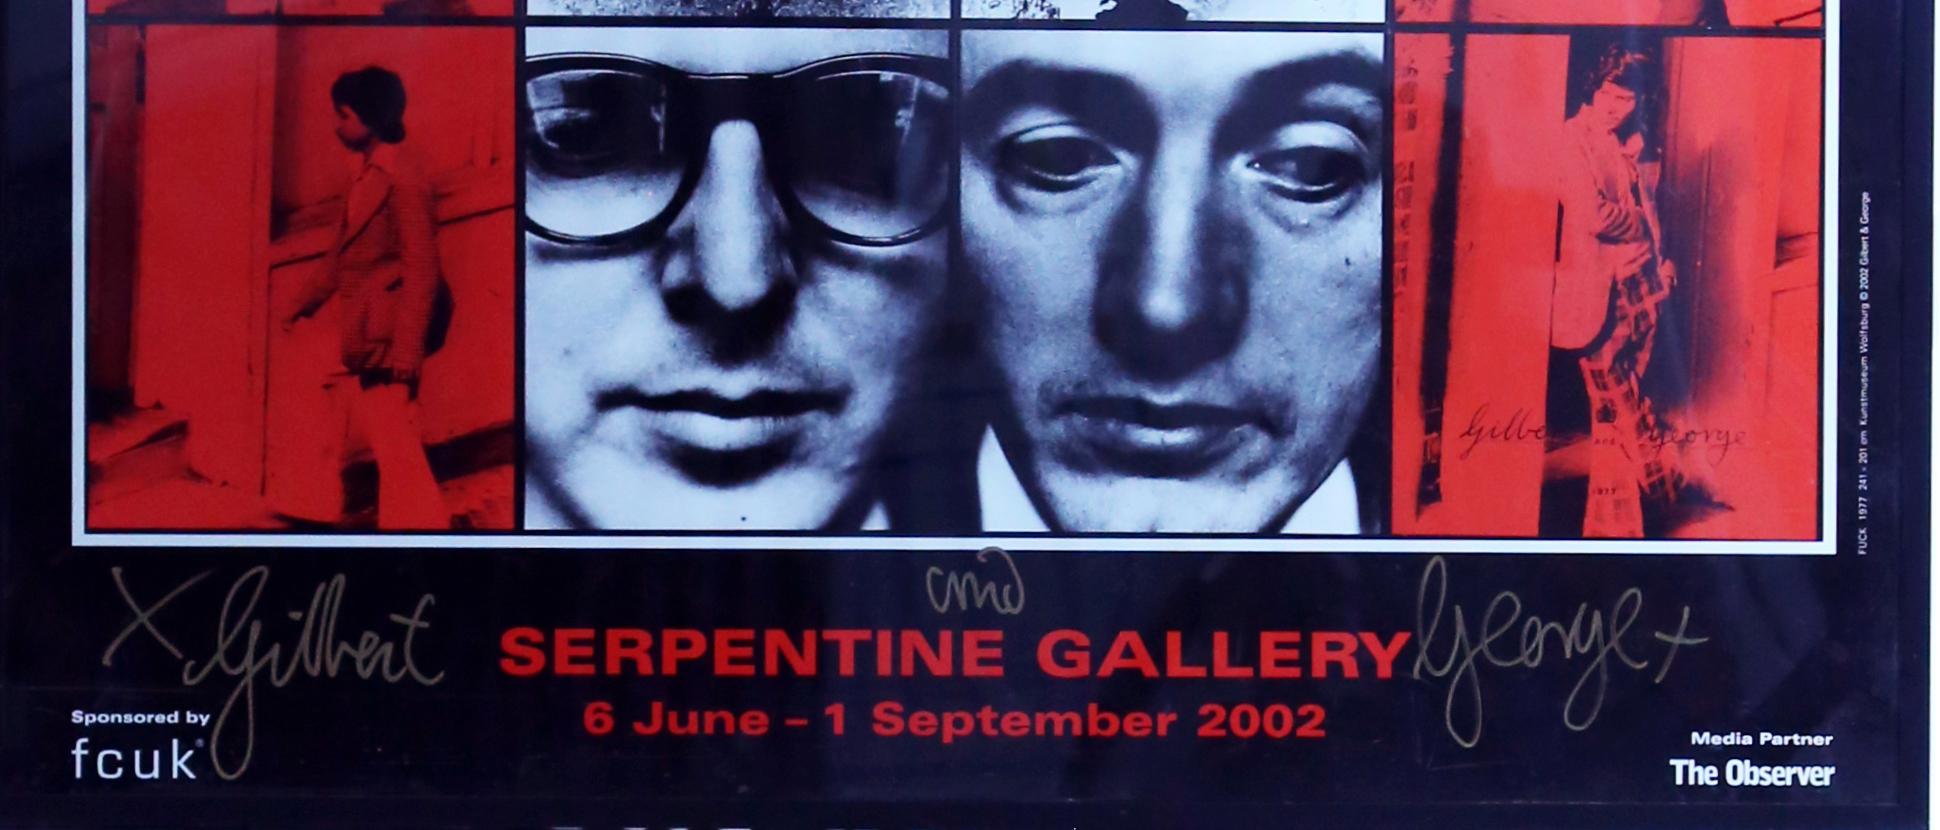 Gilbert and George Dirty Words Pictures
Original work at the Kunst Museum Wolfsburg 1977

Reprinted by Serpentine gallery in 2002
Signed in silver and gold by Gilbert and George
Offset lithograph printed in colors.